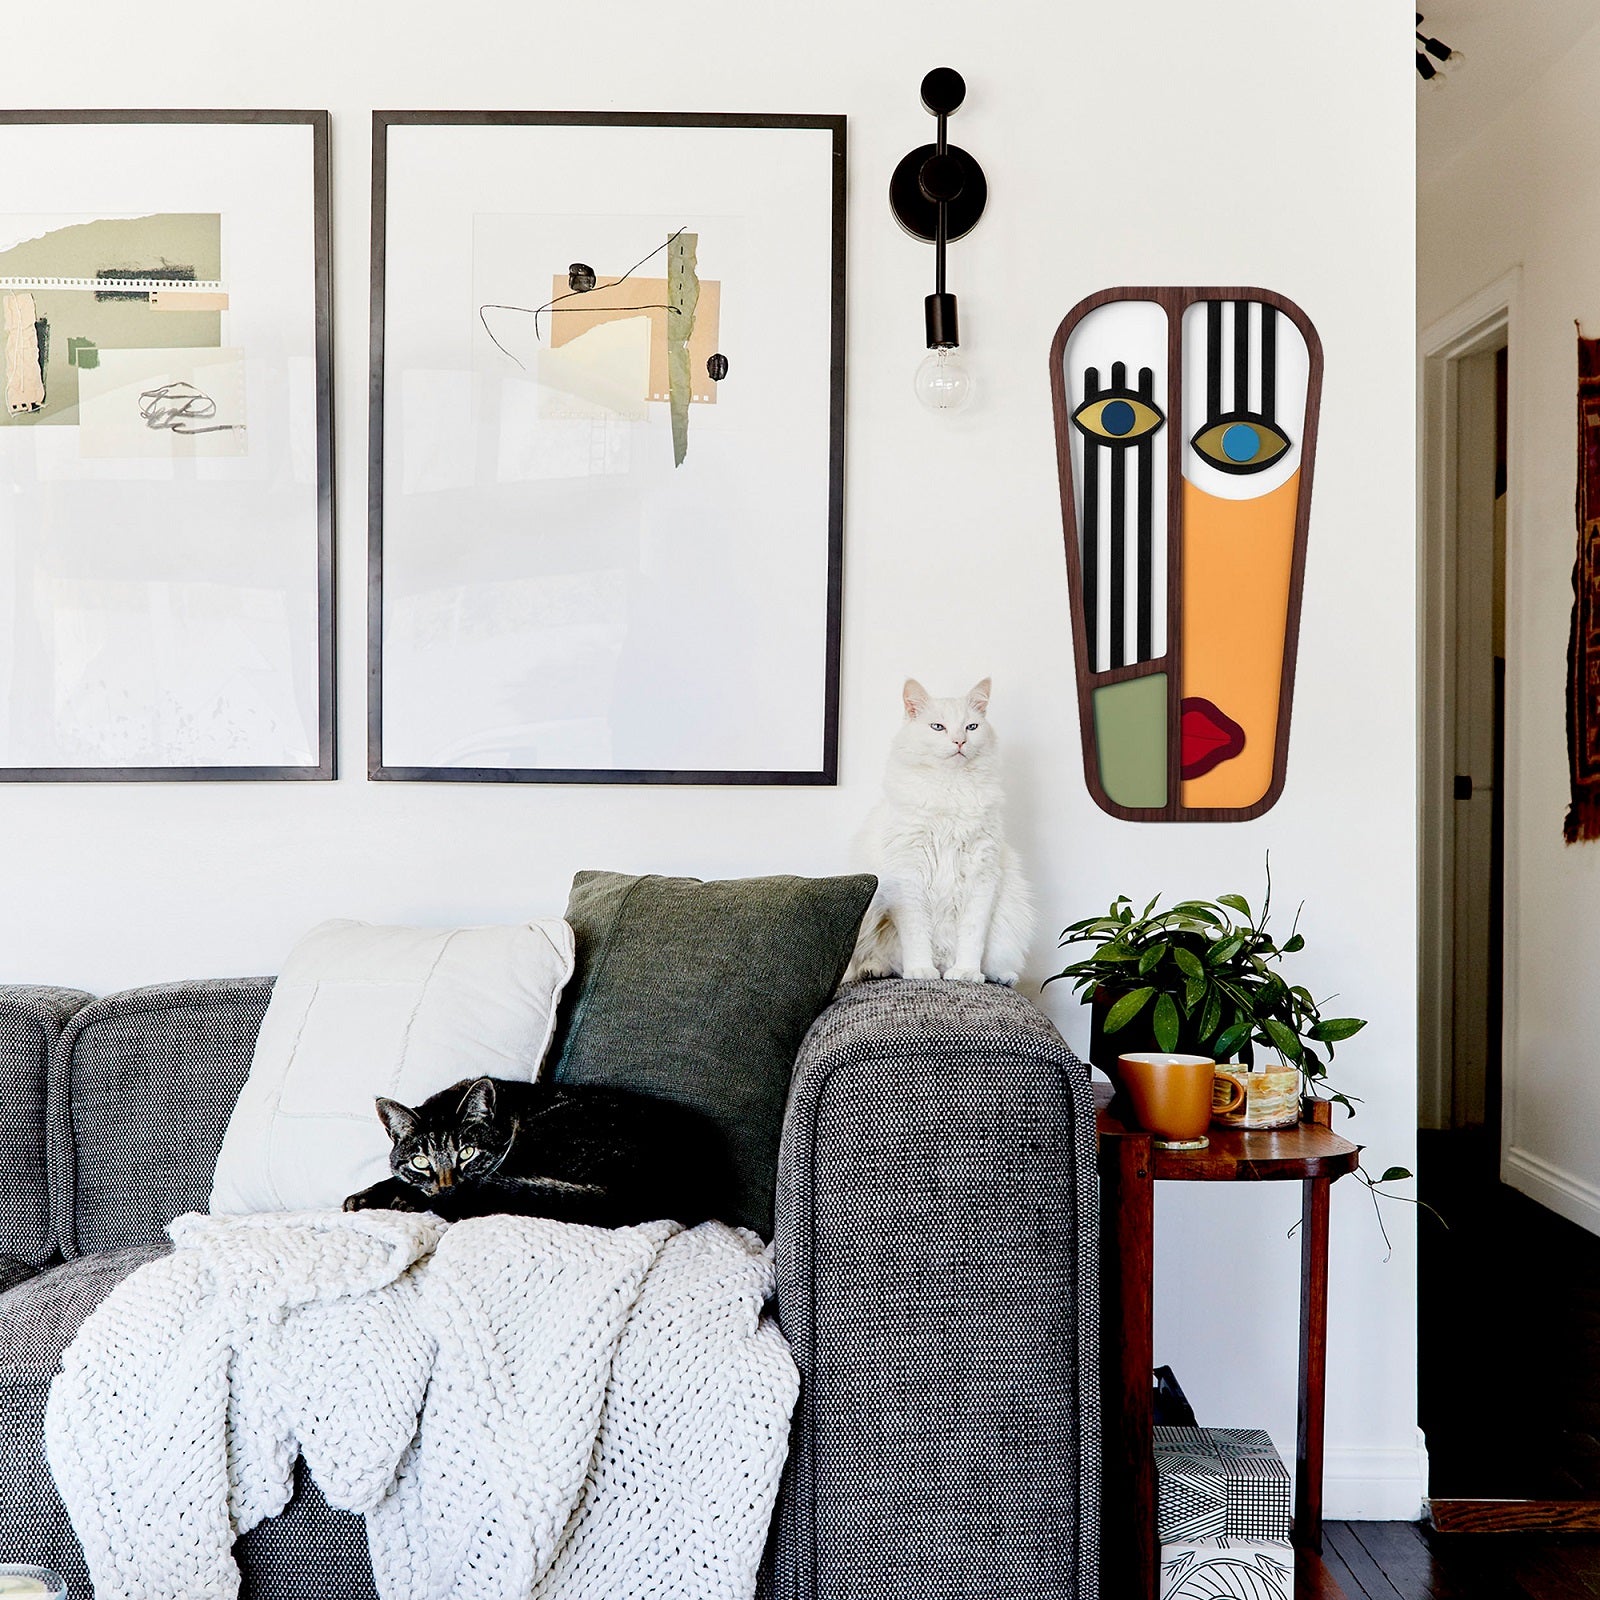 Picasso Face on the Wood: African Masks and Boho Wall Decor